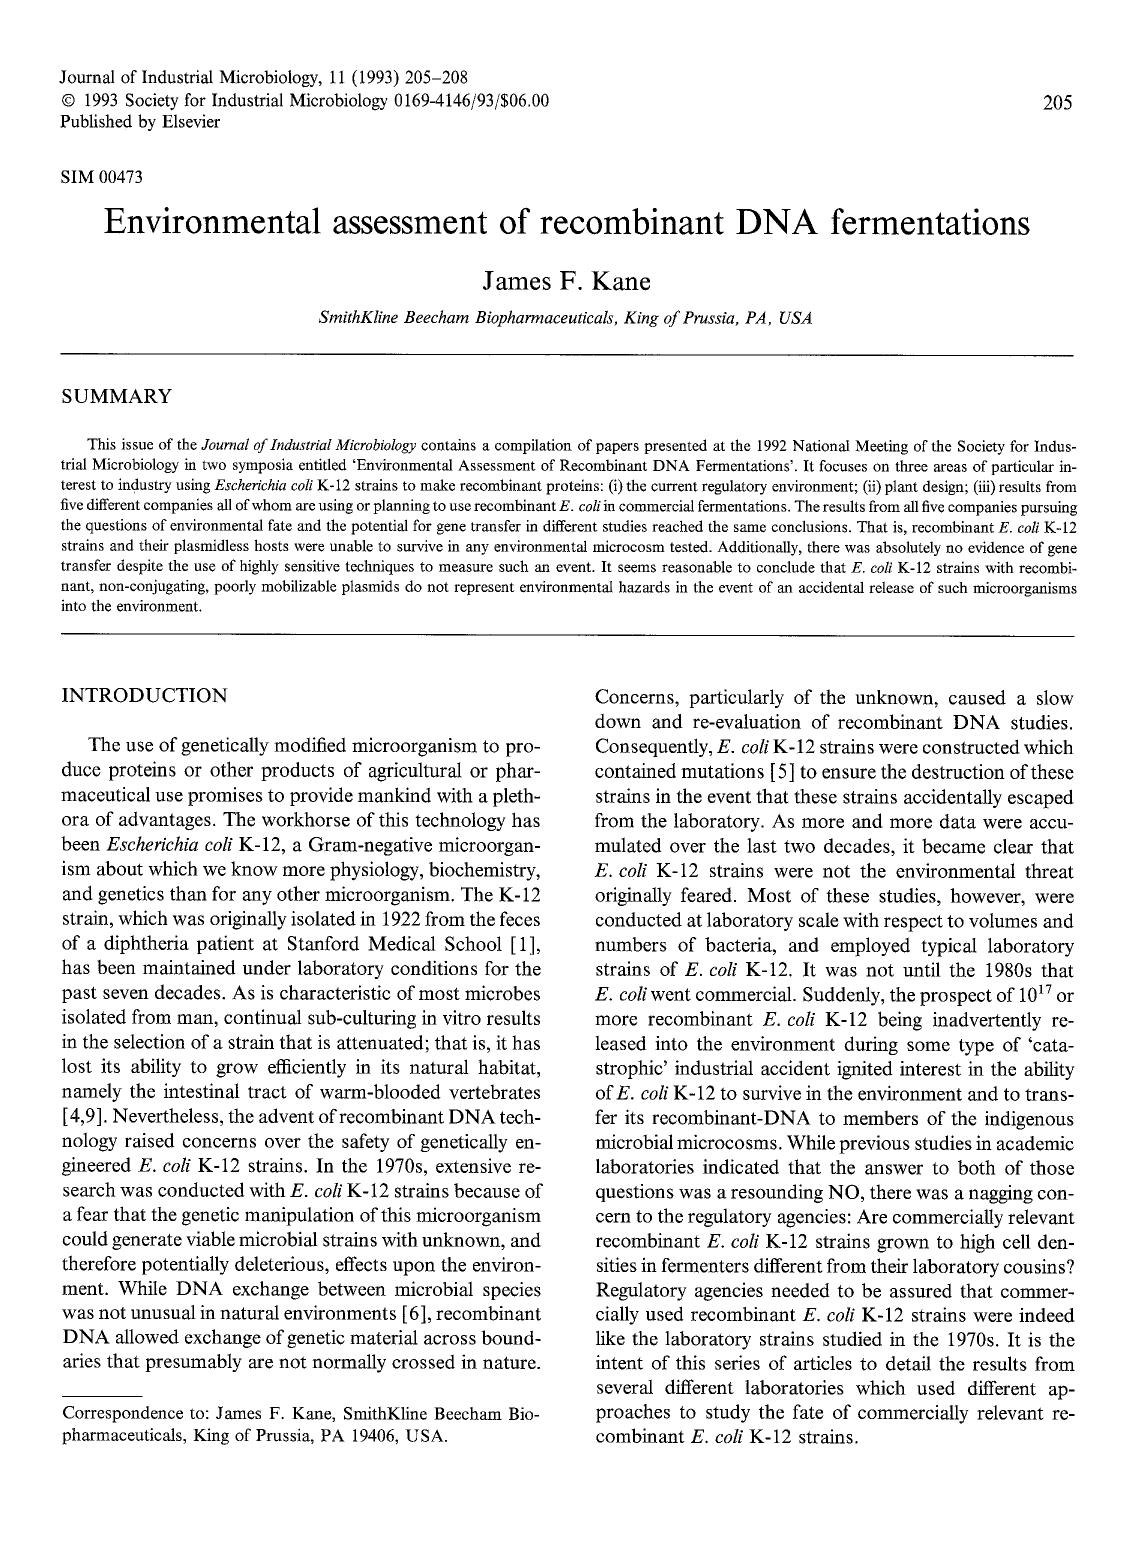 Environmental assessment of recombinant DNA fermentations by Unknown